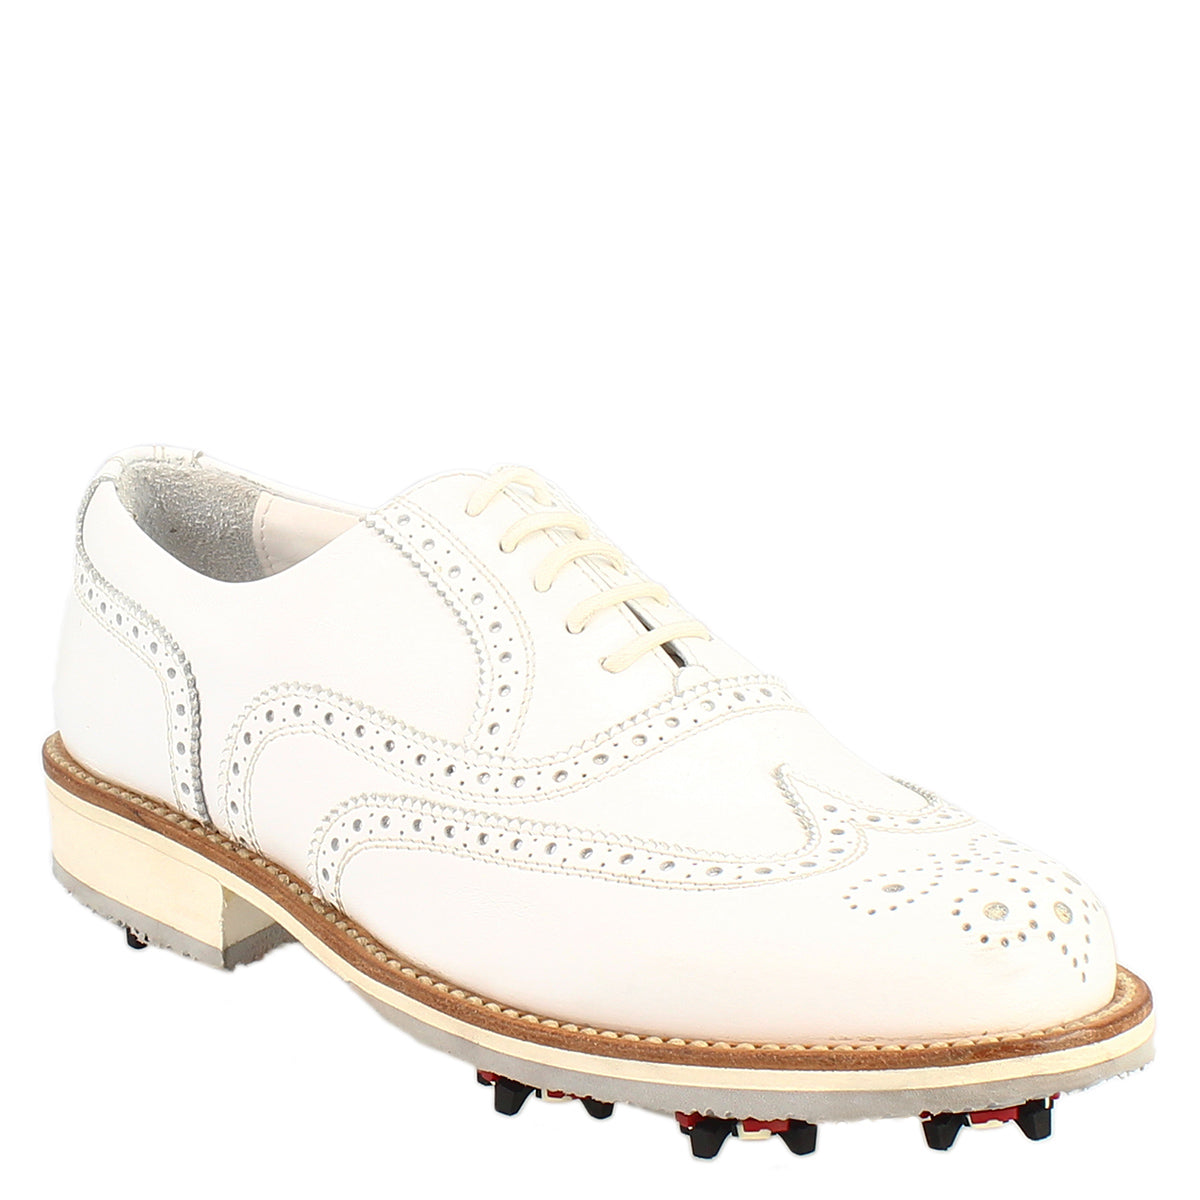 Classic brogues women's golf shoes handmade in white calf leather